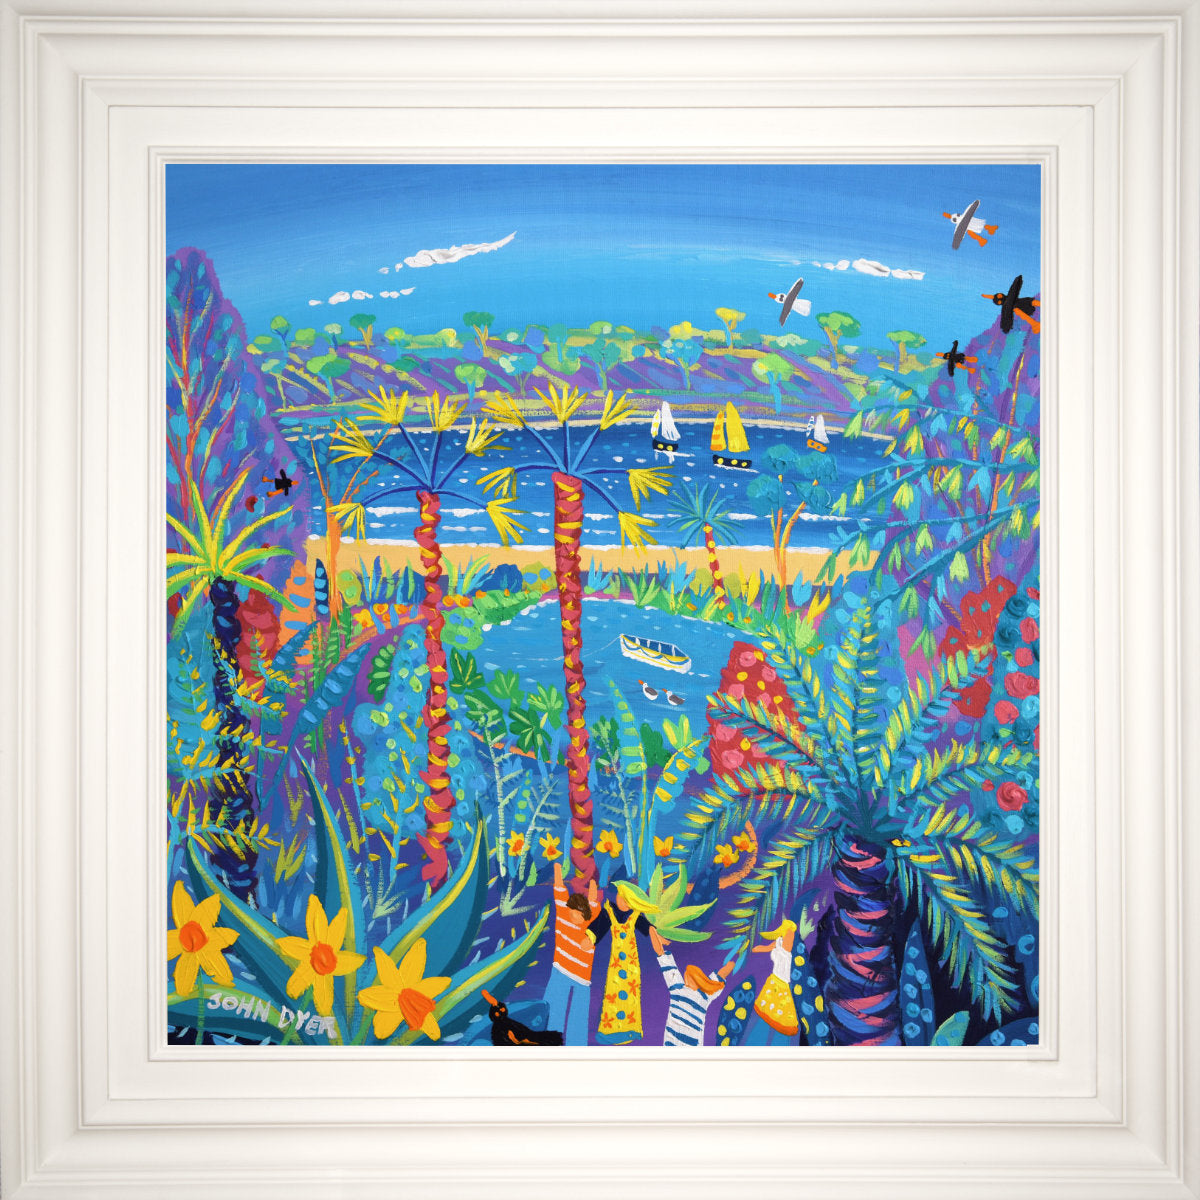 &#39;Tropical Adventure at Trebah Garden&#39;, 24x24 inches acrylic on canvas. Cornwall Painting by Cornish Artist John Dyer. Cornish Art from our Cornwall Art Gallery